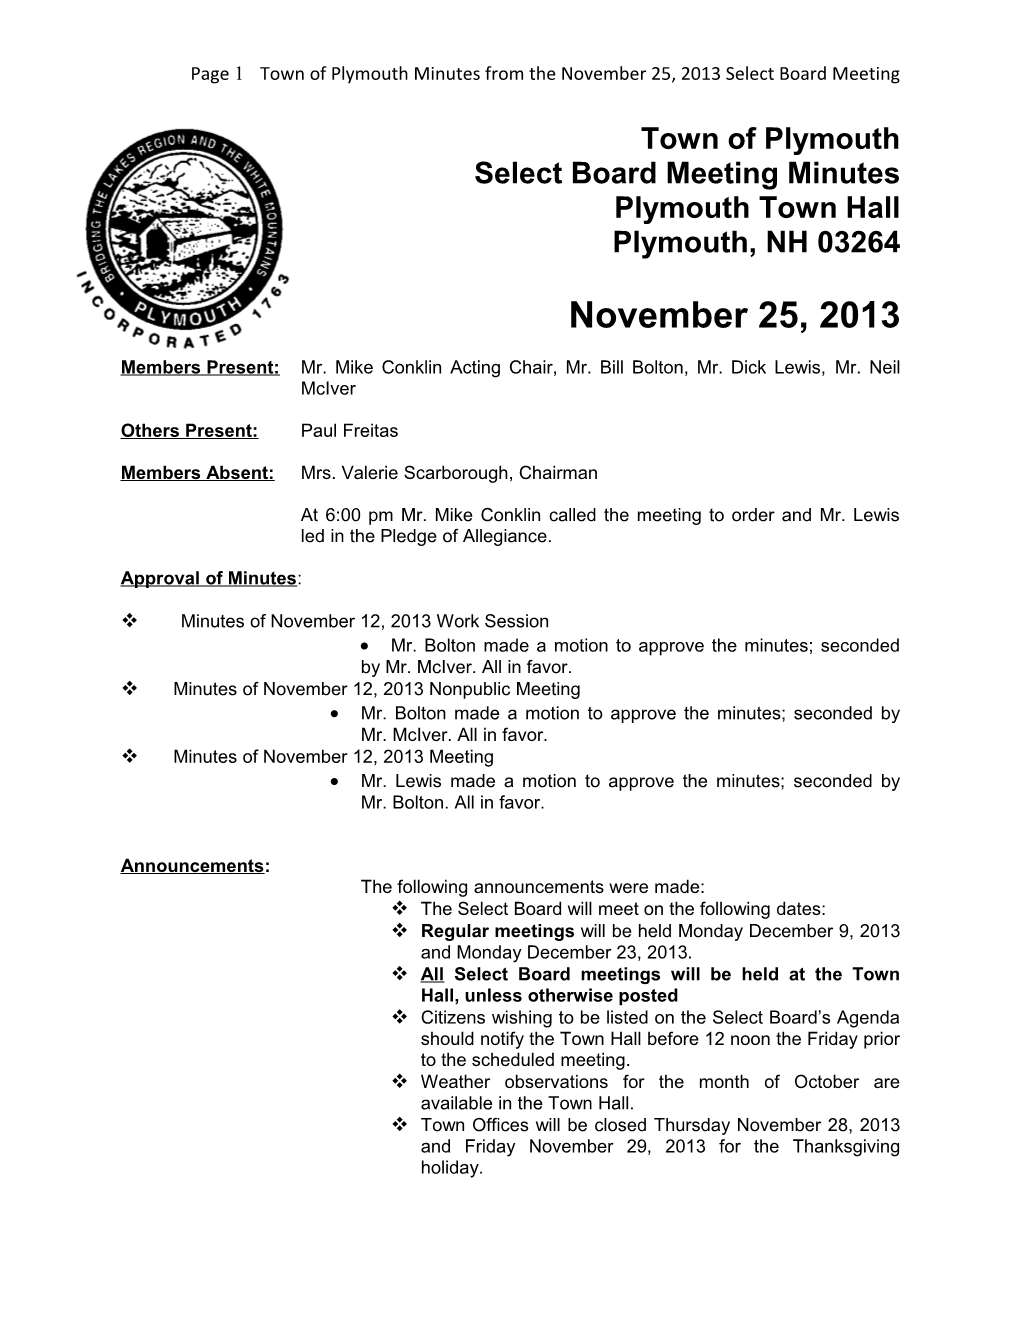 Town of Plymouth Minutes from the September 24, 2012 Select Board Meeting